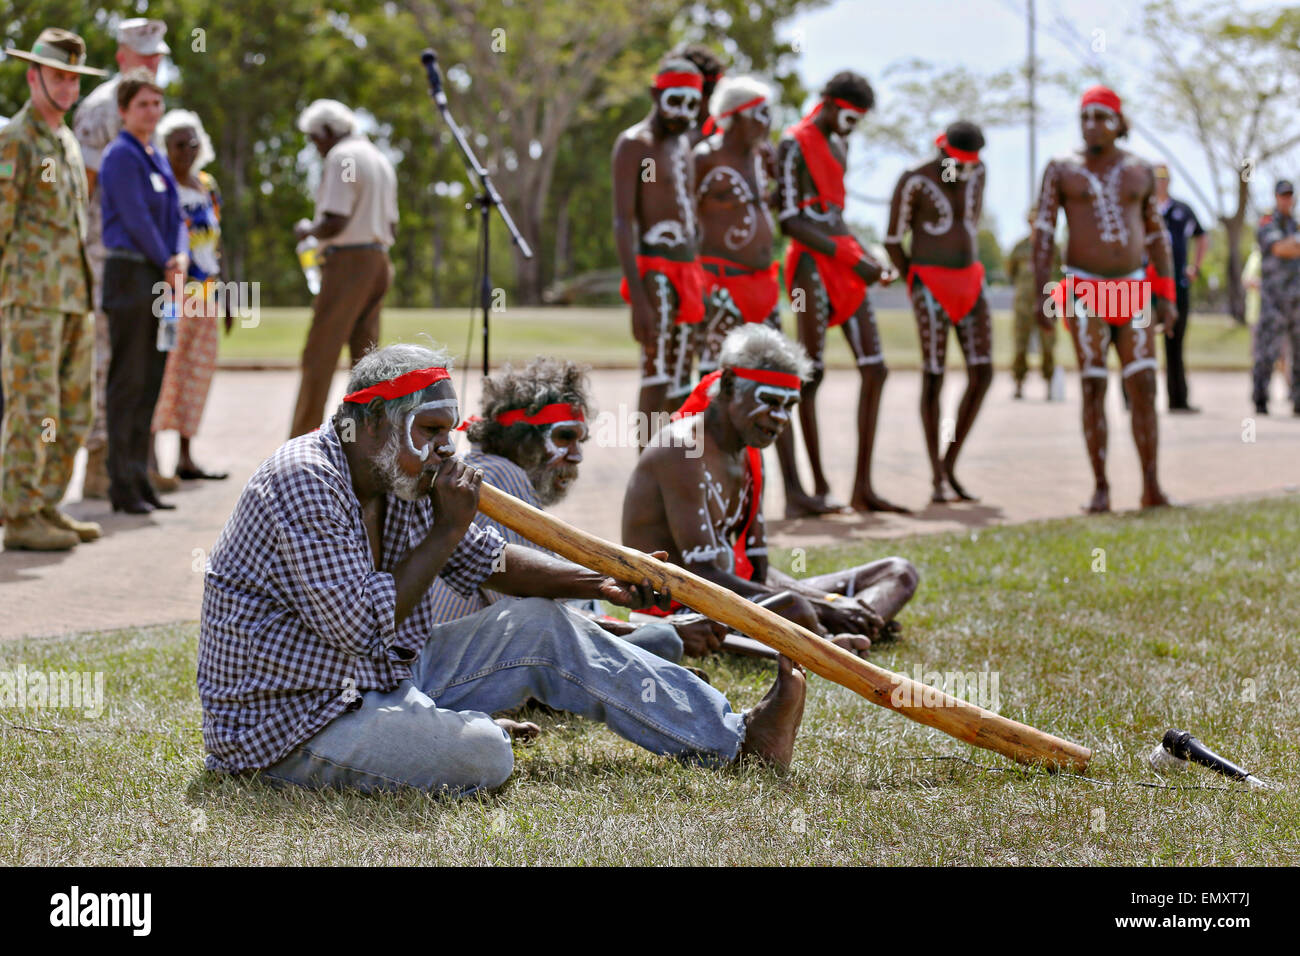 Australian Aborigines play traditional music using a didgeridoo during a welcome ceremony for the U.S. Marines at the Brigade Parade Ground at Robertson Barracks 22, 2015 in Palmerston, Australia Stock Photo - Alamy